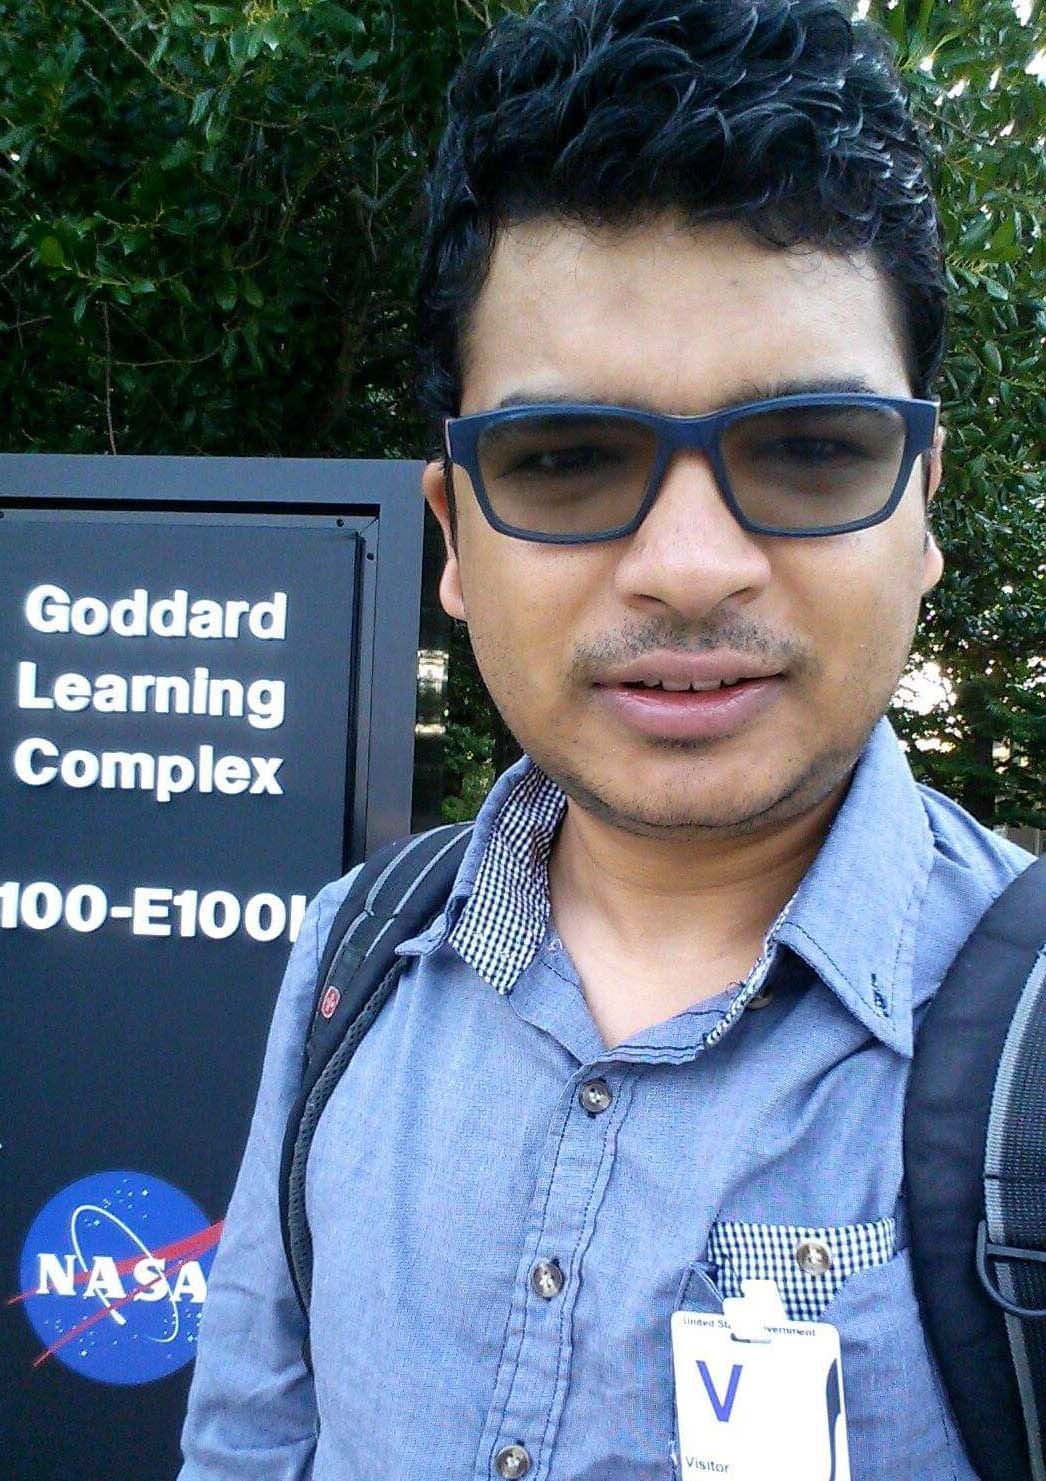 Man with black hair and tan skin wears black glasses, a blue collared shirt, and backpack.  He stands in front of a green tree and a sign that says "Goddard Learning Complex" with the NASA meatball